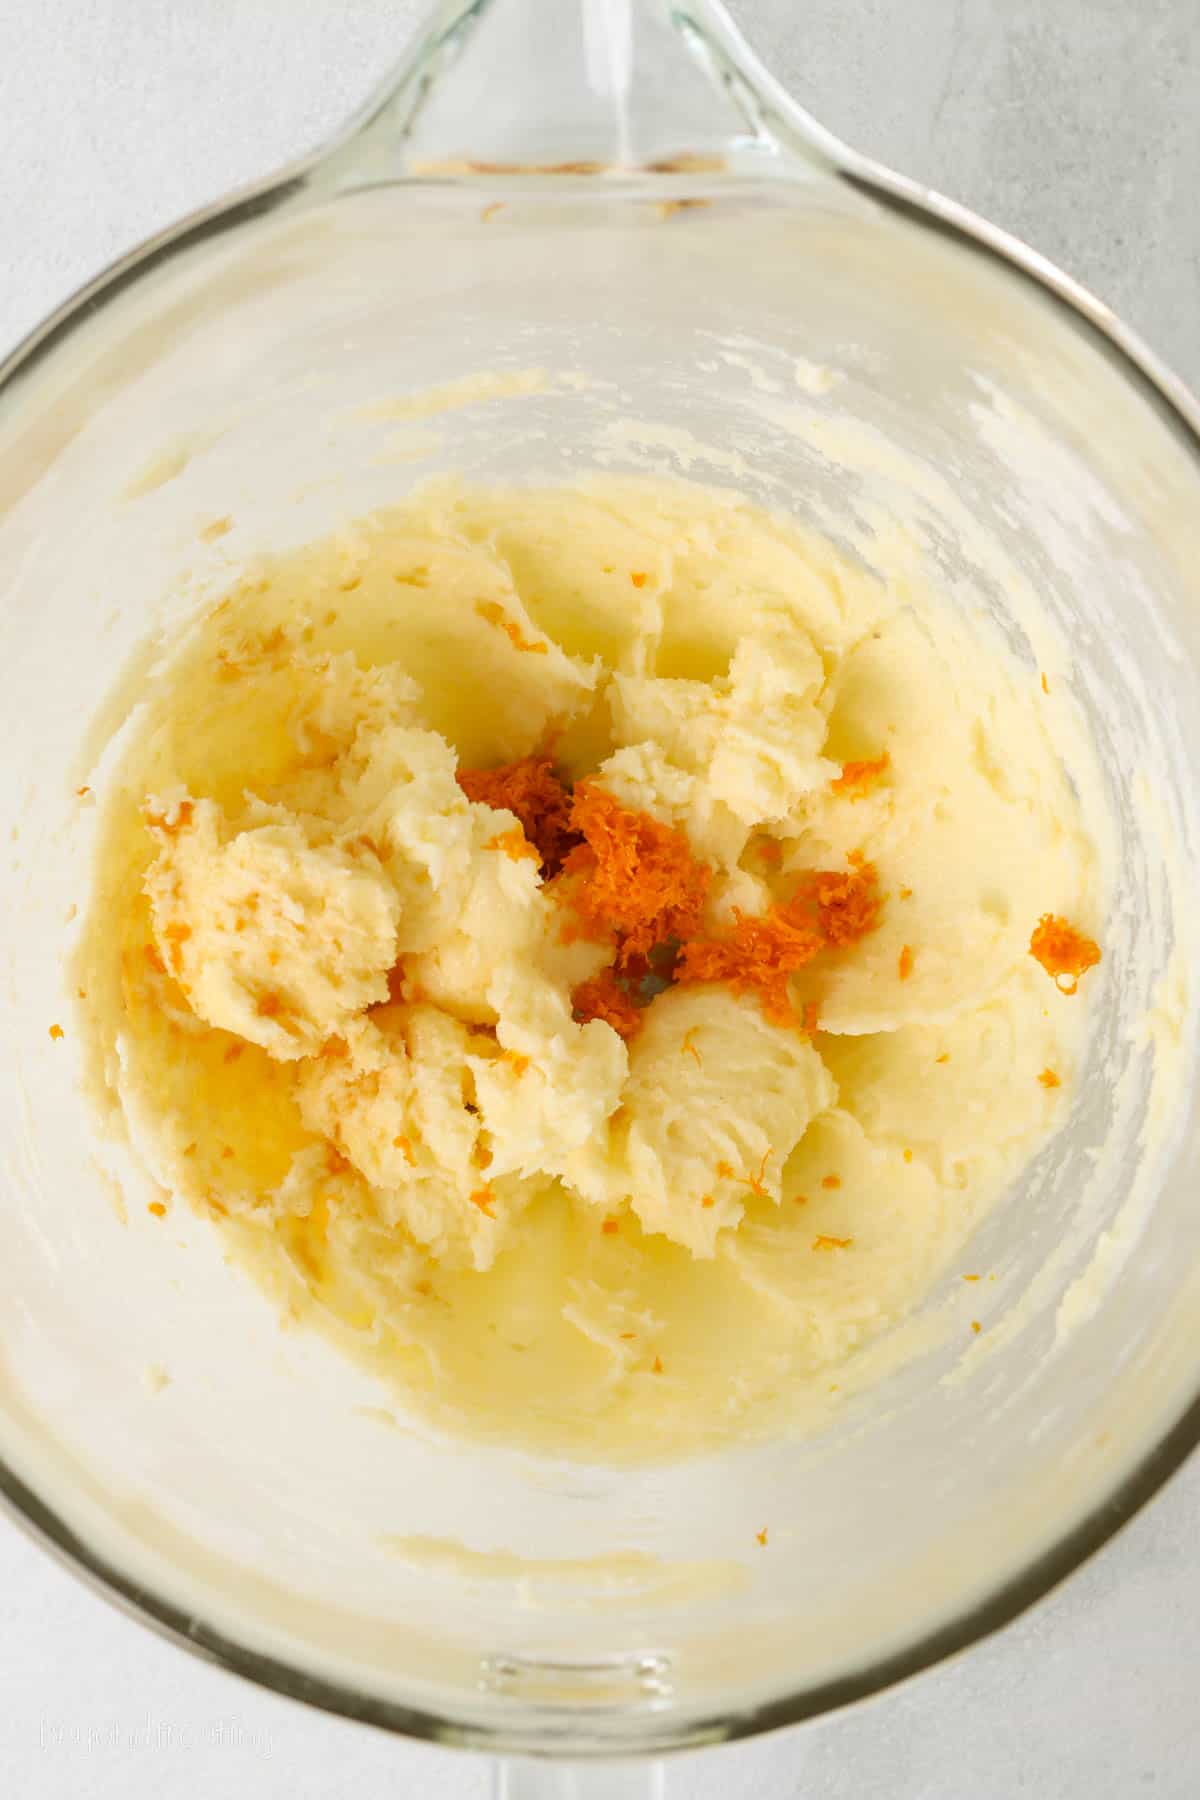 Orange zest added to shortbread cookie dough in a glass mixing bowl.